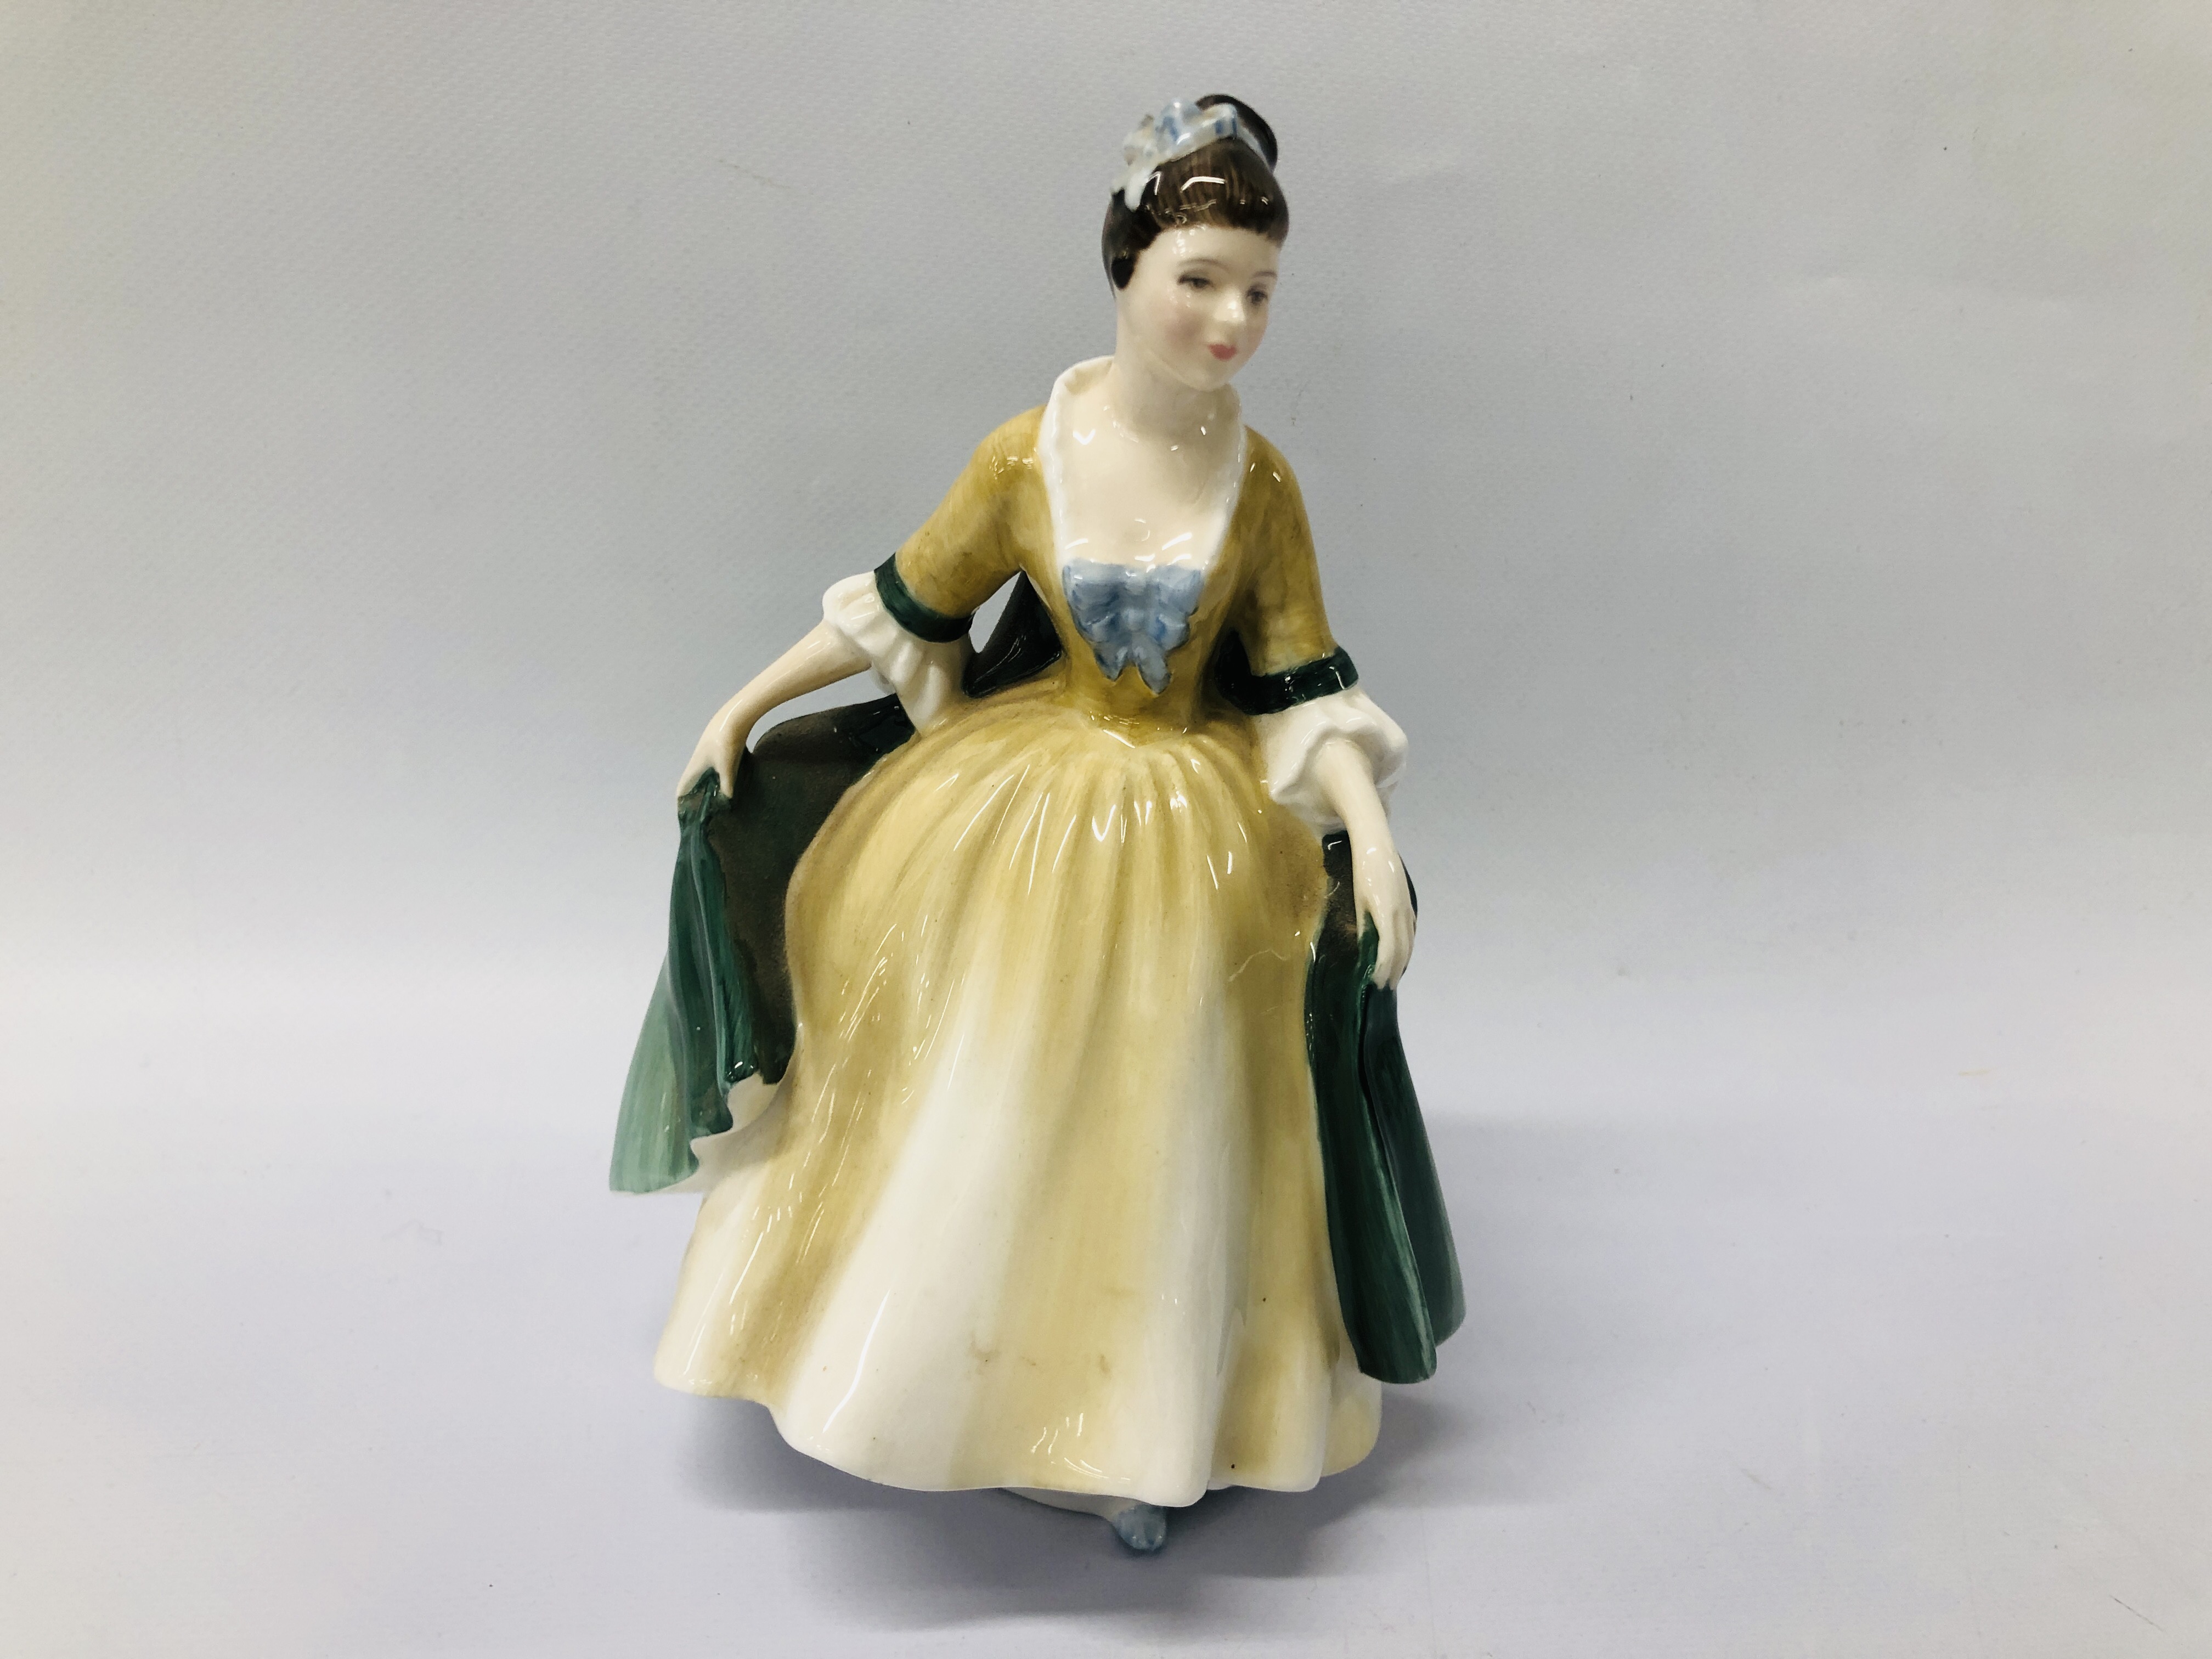 2 X ROYAL DOULTON FIGURINES TO INCLUDE ELEGANCE HN 2264 AND THE FAVOURITE HN 2249. - Image 5 of 9